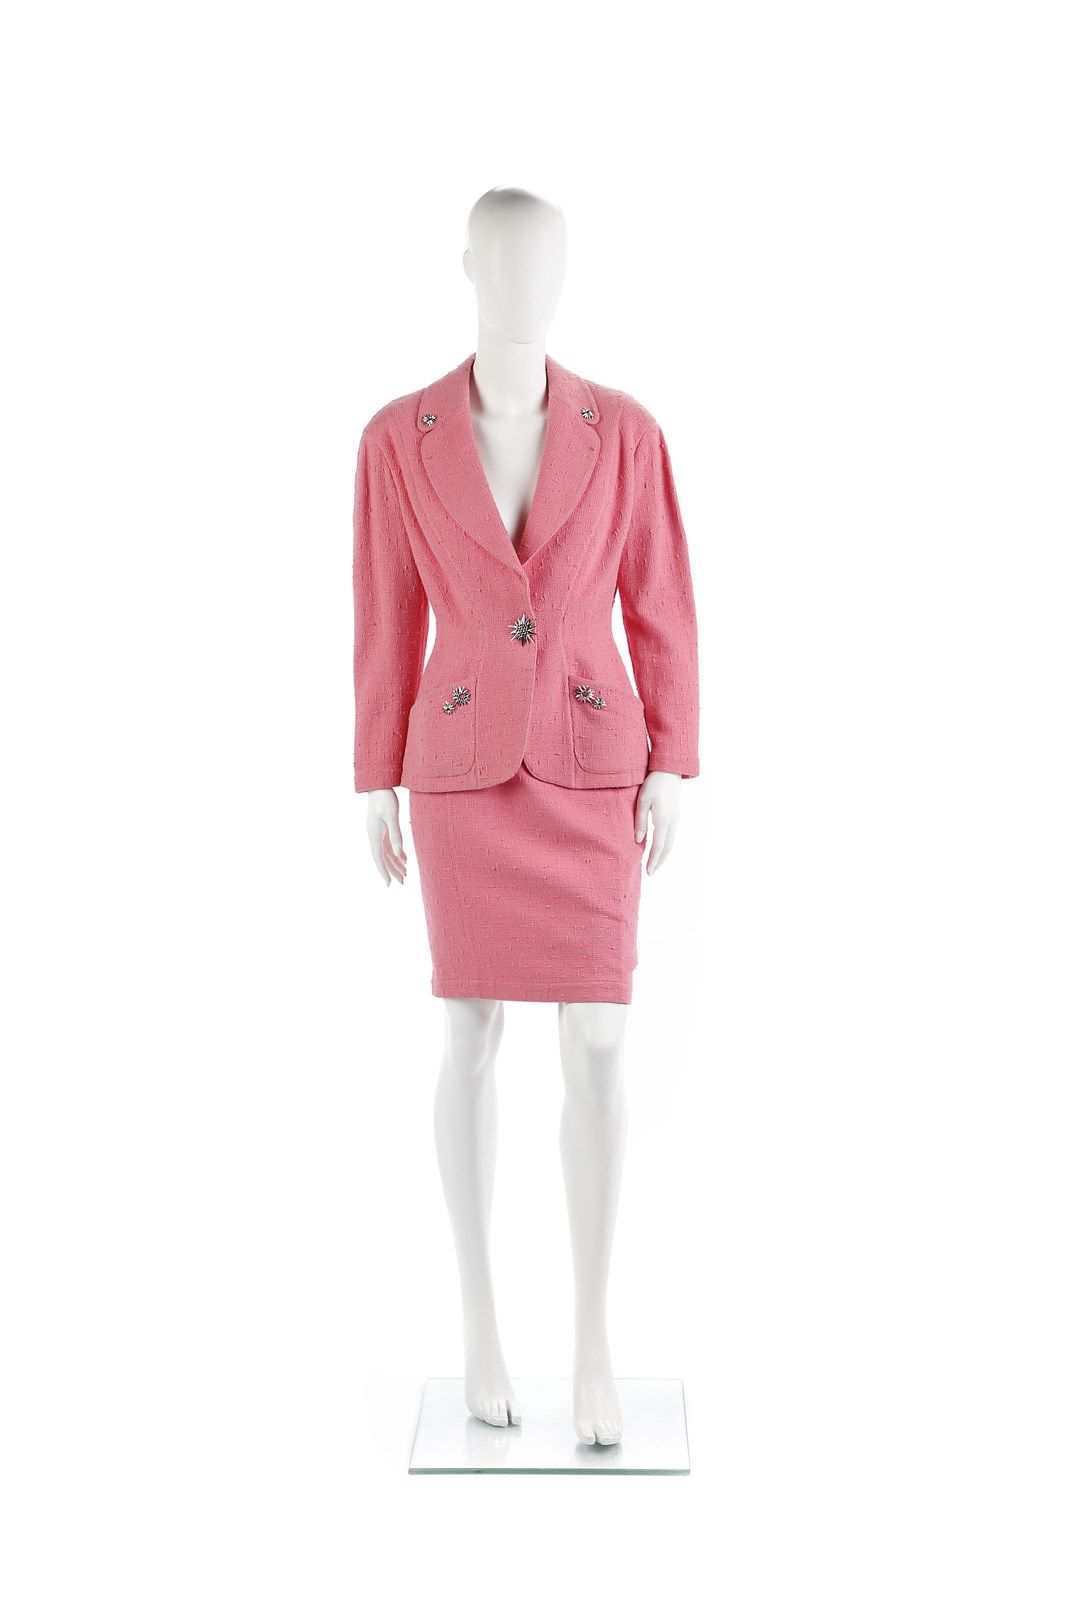 THIERRY MUGLER Suit consisting of pink cotton jacket and skirt, jewel buttons. S&hellip;